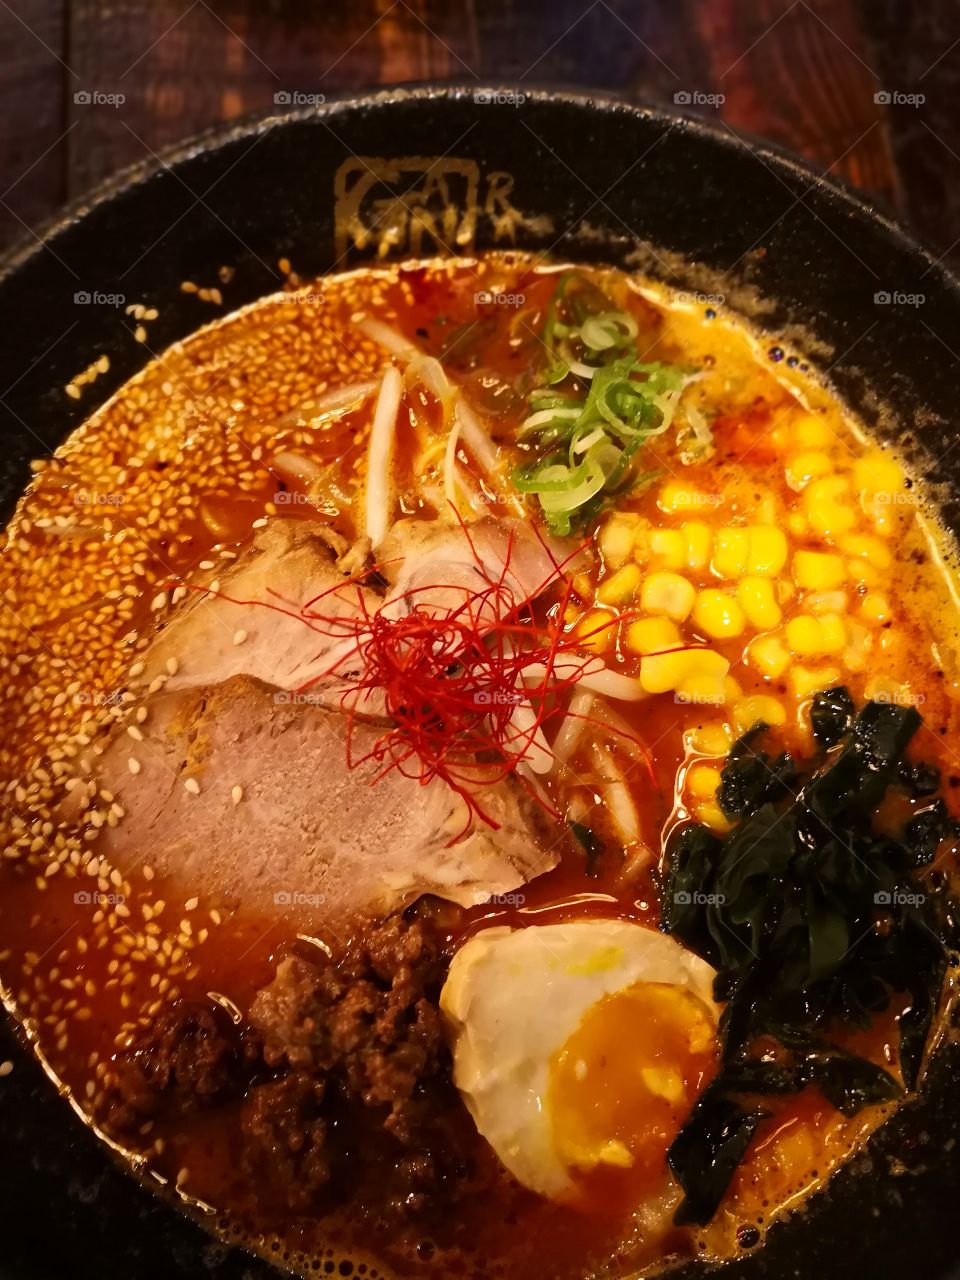 Japanese Ramen with delicious spicy broth.